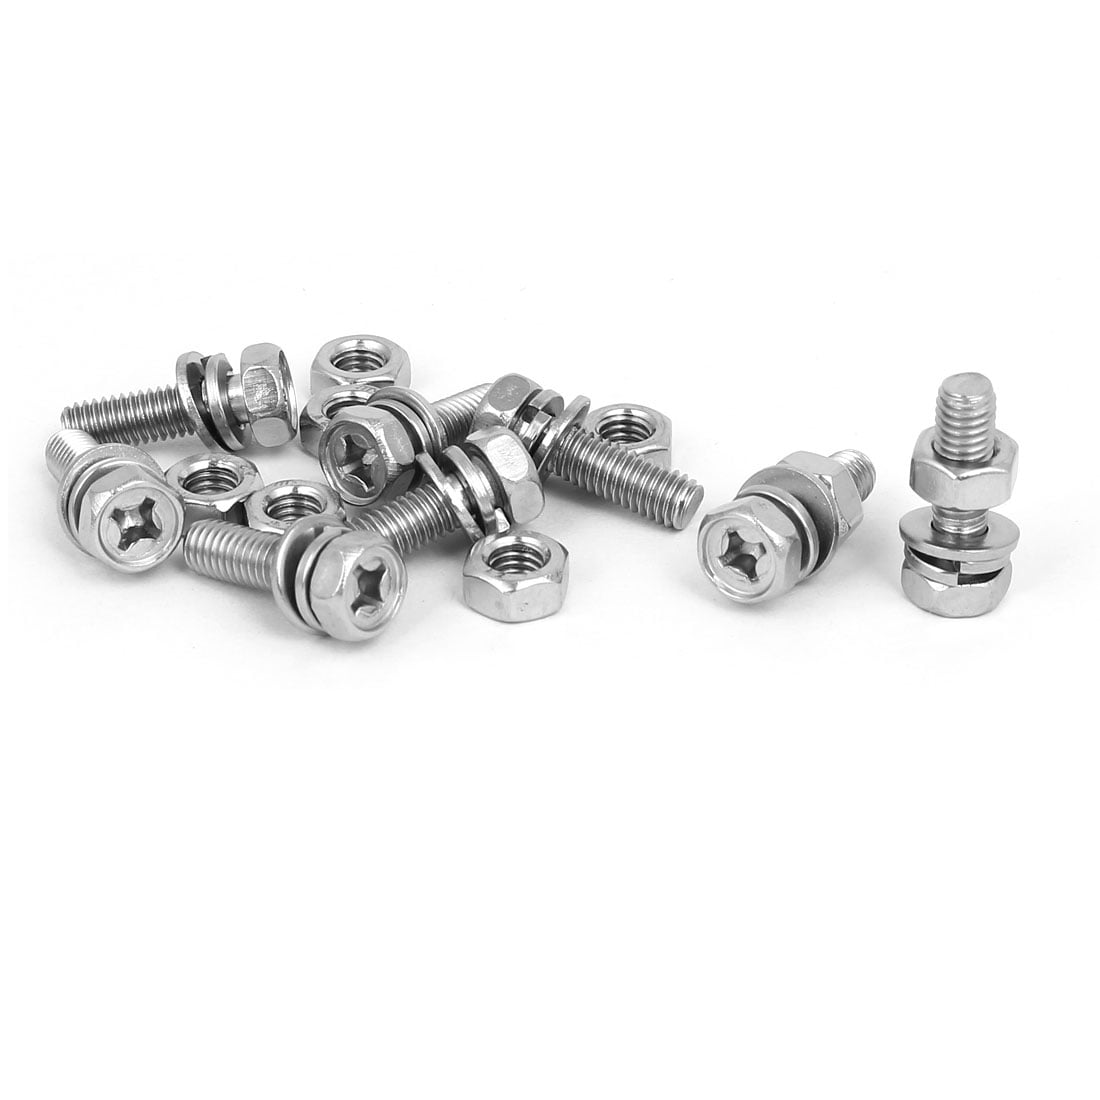 M6 x 20mm 304 Stainless Steel Phillips Hex Head Bolts Nuts w Washers 8 ...